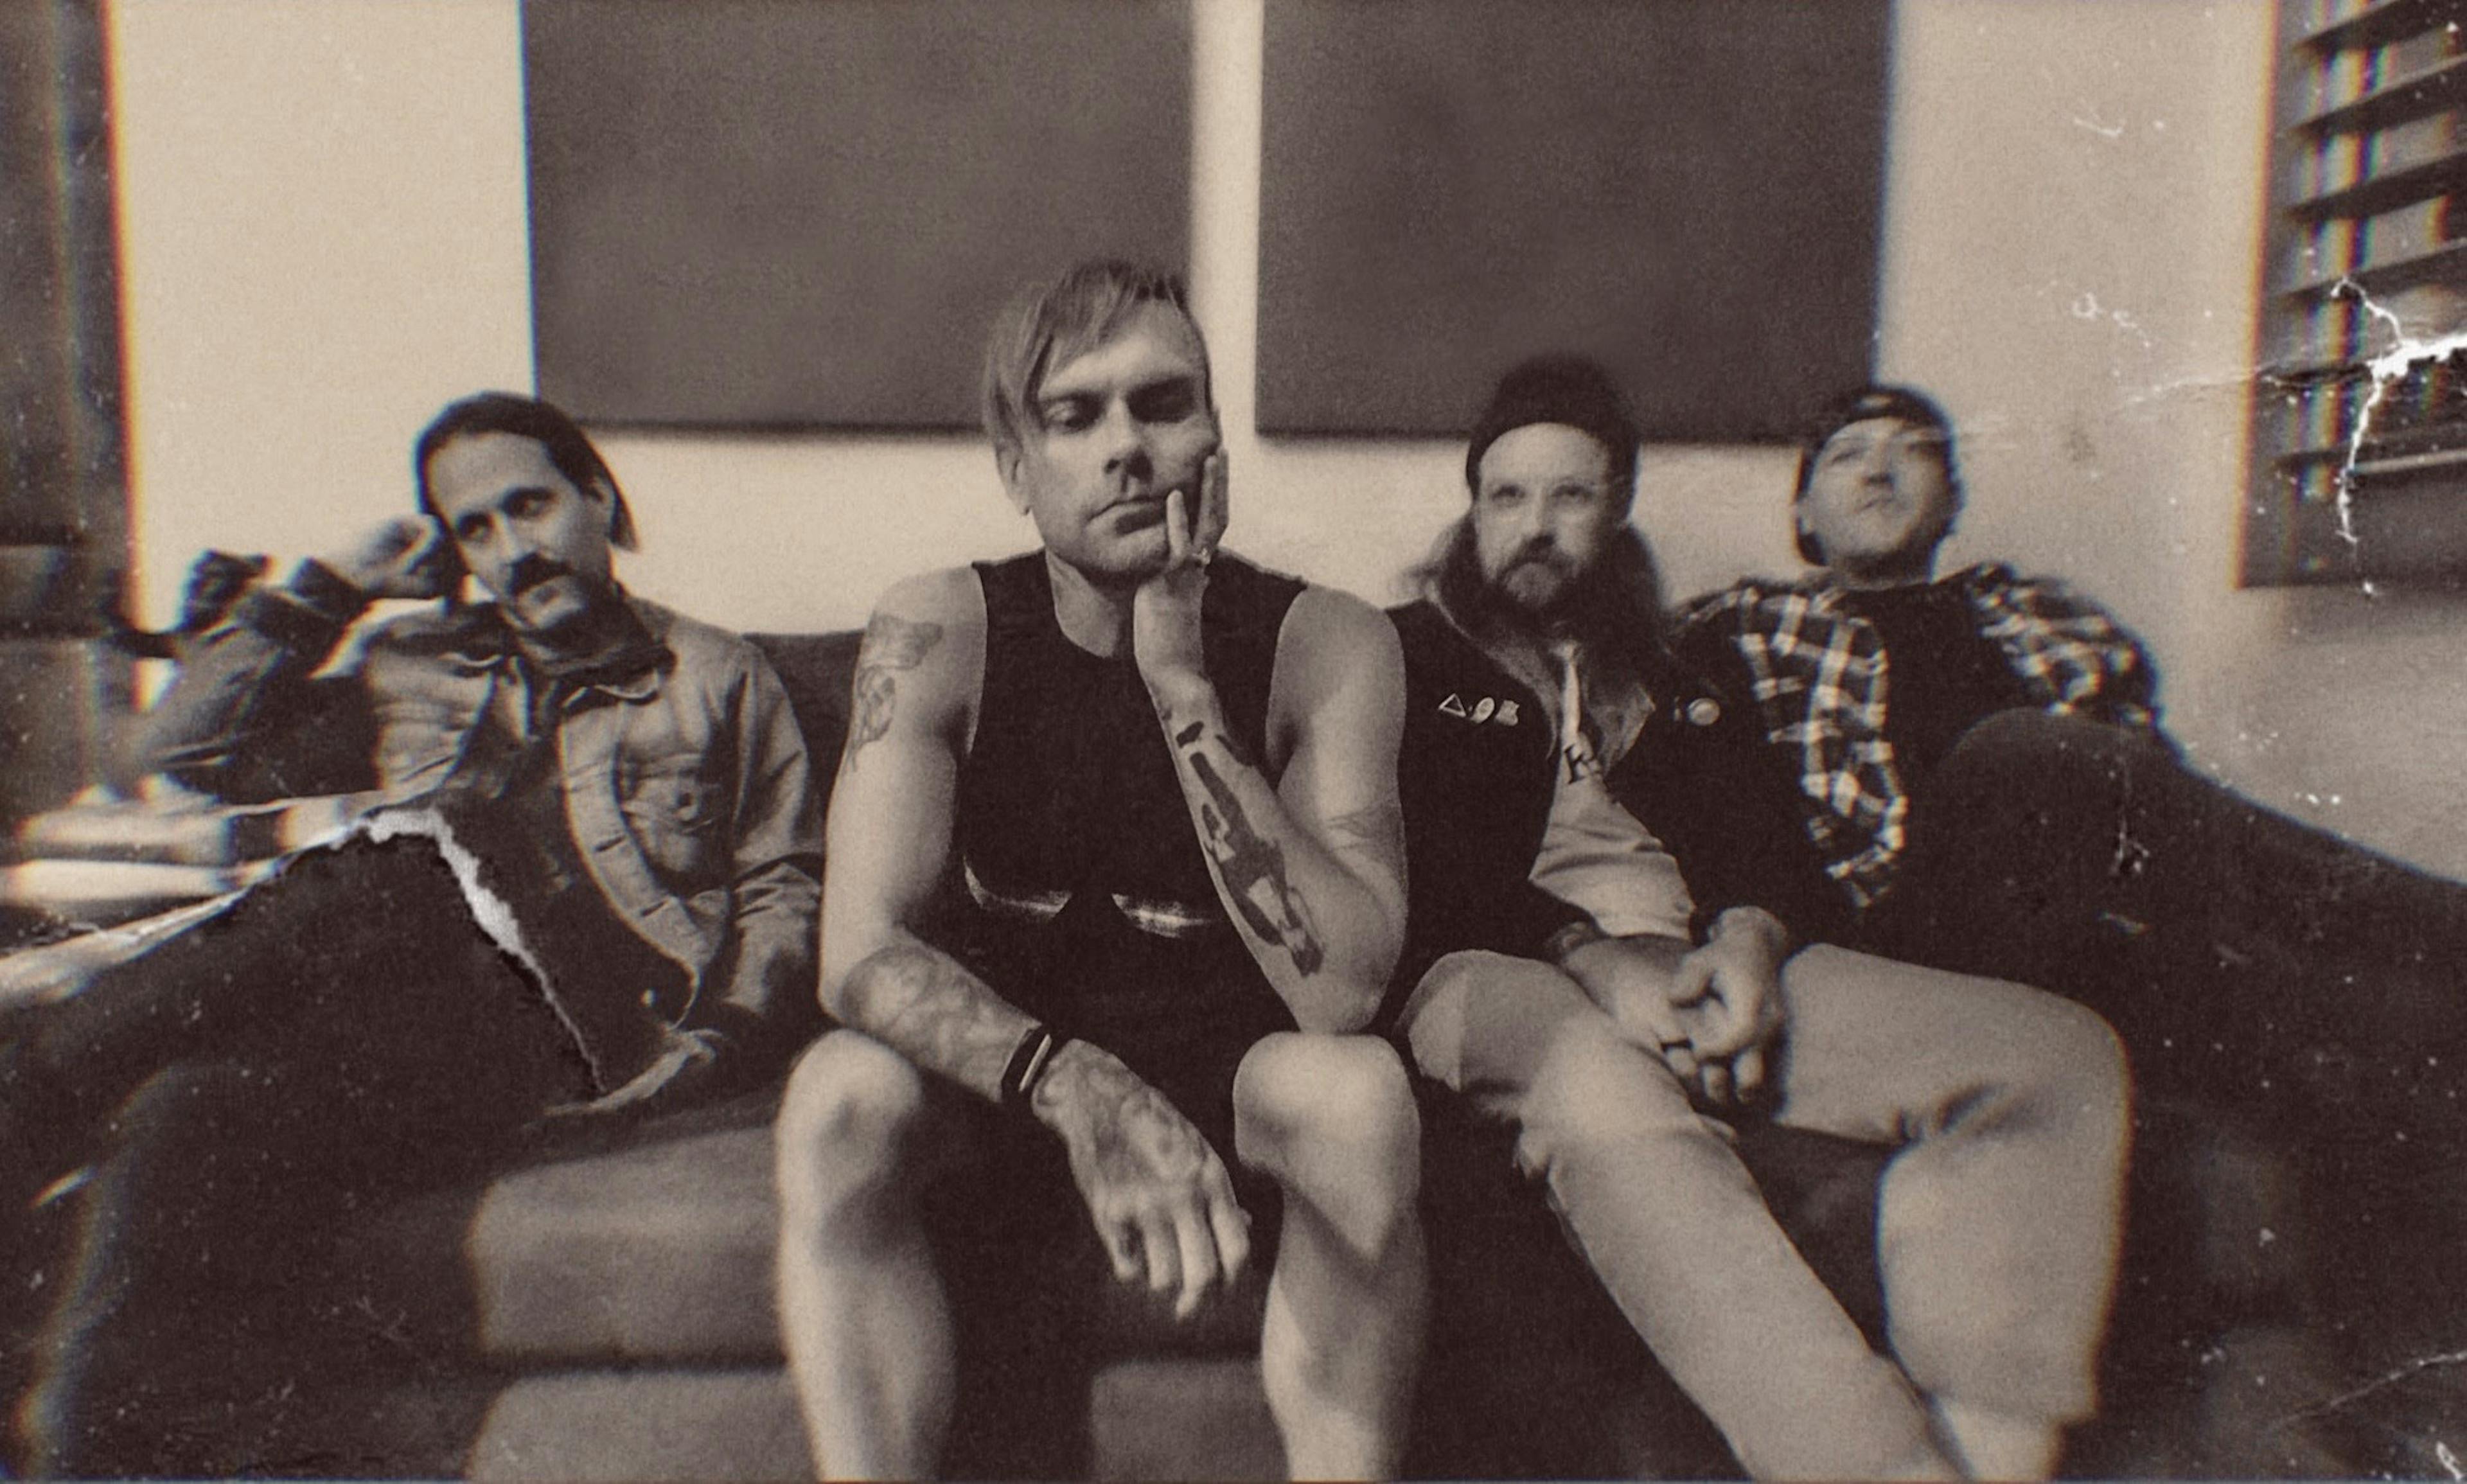 The Used Release New Song Blow Me, Featuring Jason Aalon Butler